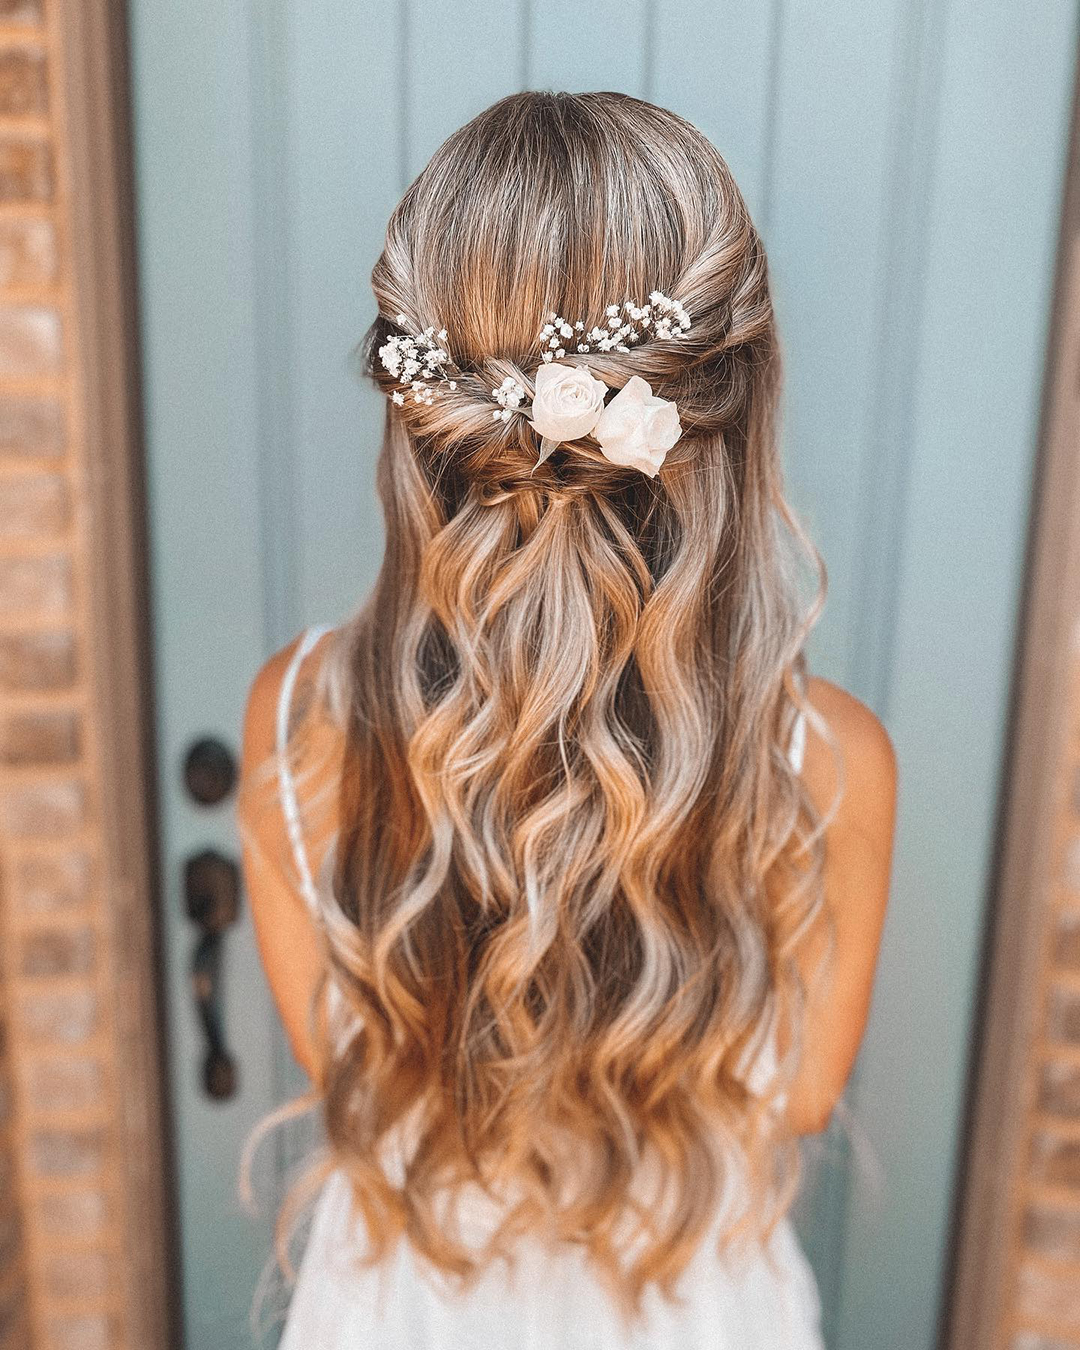 half up half down wedding hairstyles textured with fresh roses babehairbyb